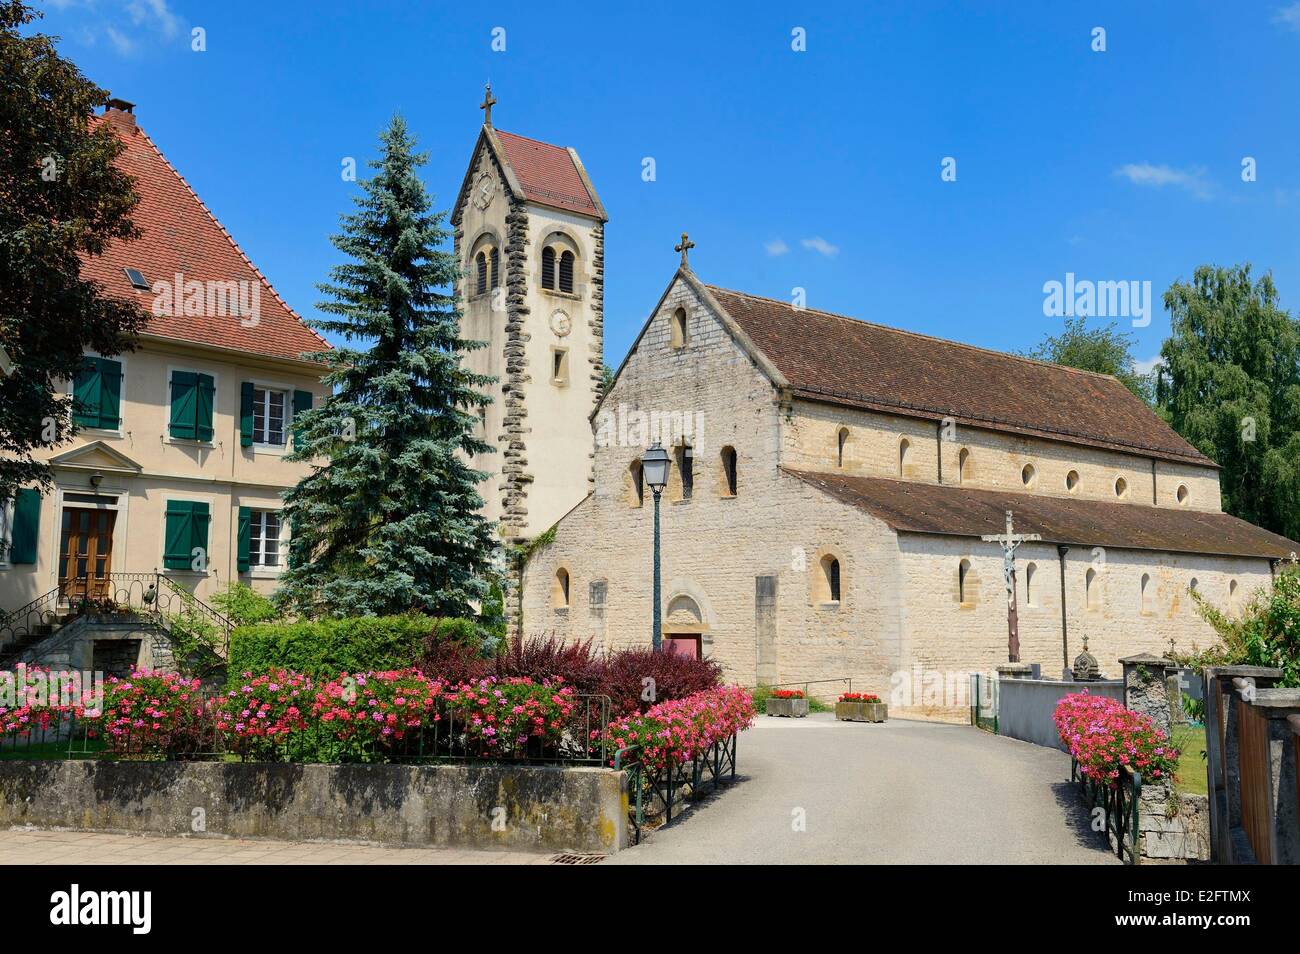 France Haut Rhin Sundgau Feldbach Saint-Jacques church of the 12th century former priory founded by Frederic 1st Earl of Stock Photo